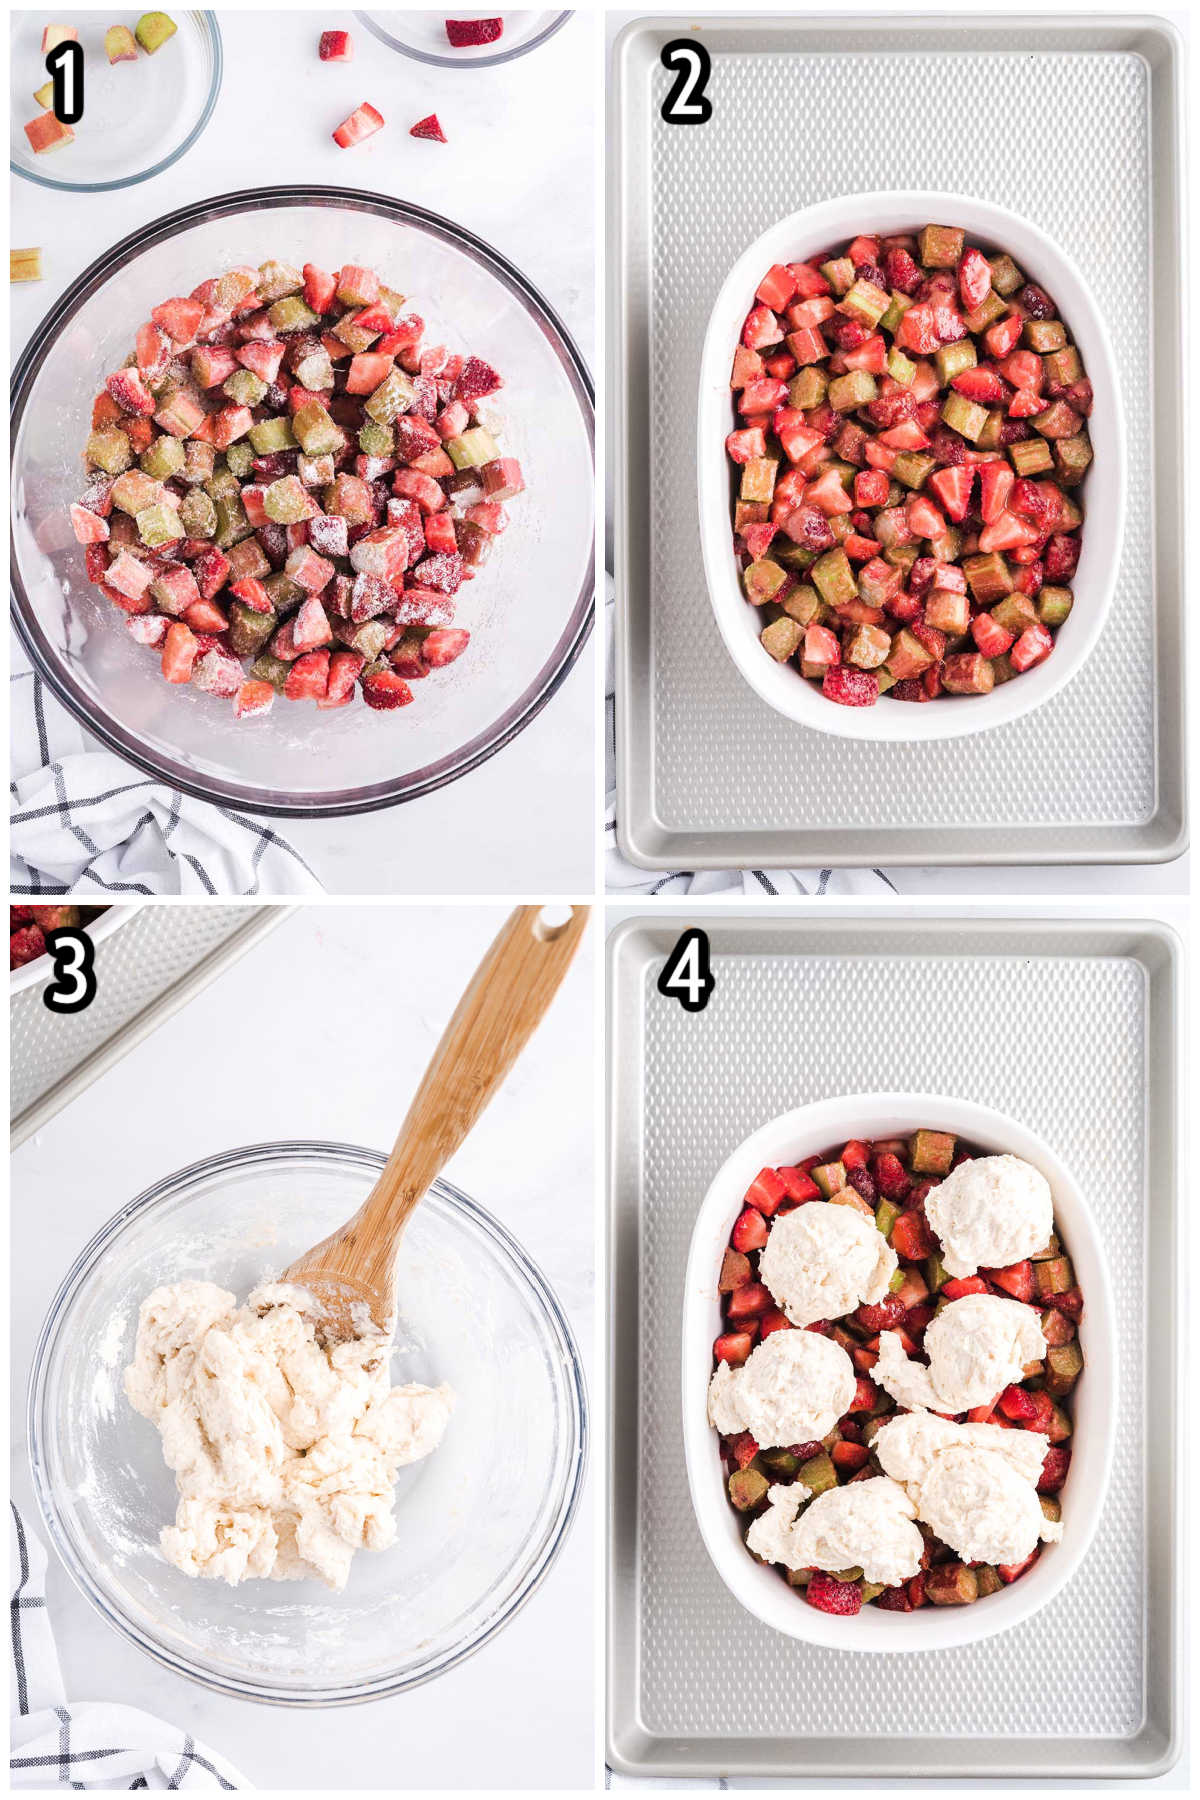 strawberry rhubarb cobbler step by step pictorial instructions.